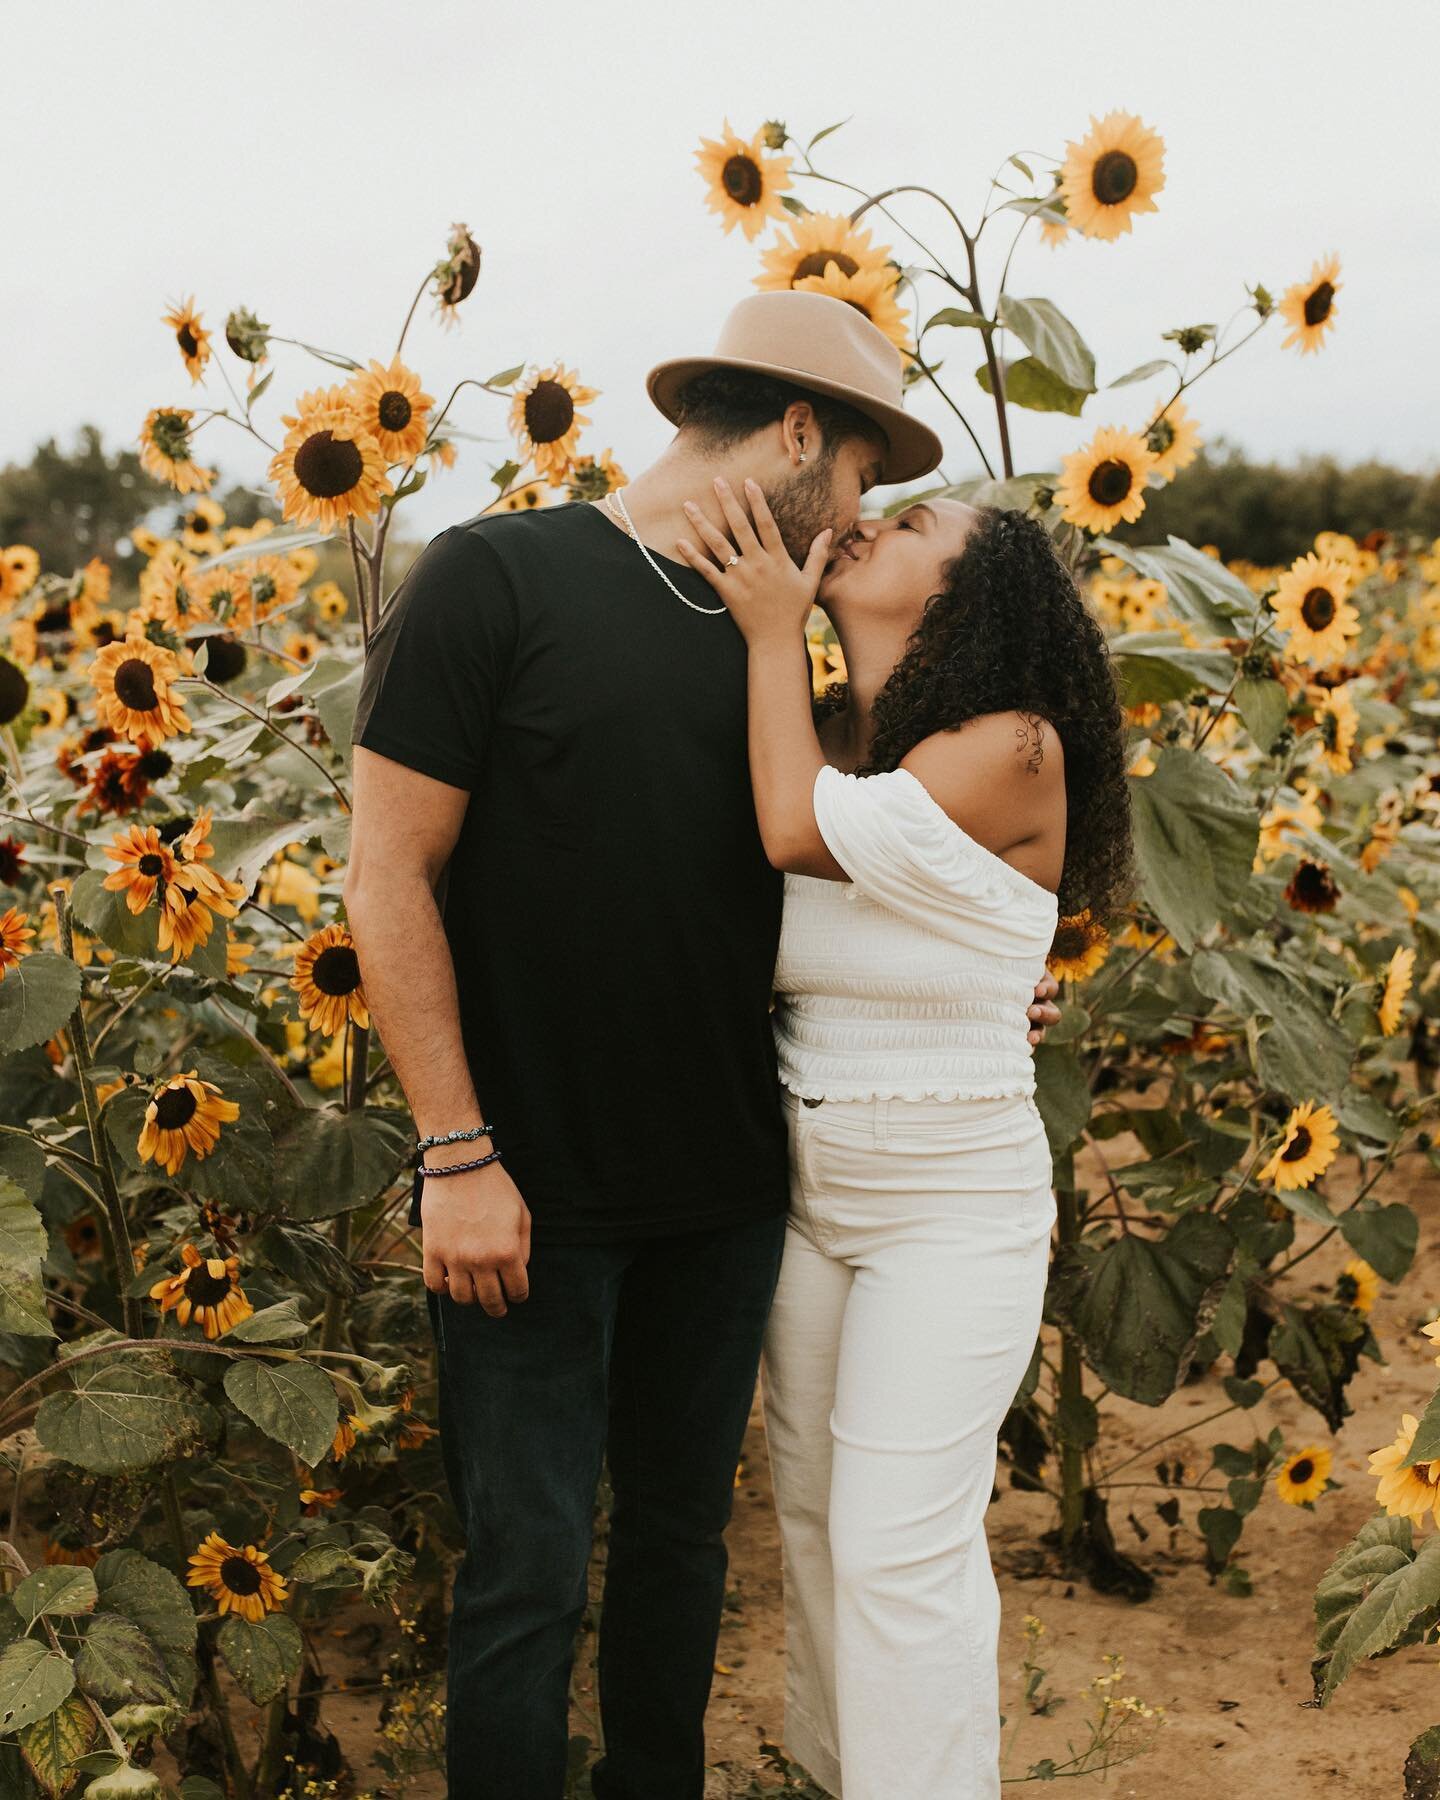 CAN WE TALK ABOUT YESTERDAY&rsquo;S DREAM PROPOSAL 👏🏽💛✨ 

A happy field of sunflowers on a late September evening - what else do you need I mean COME ON. 🥺

Such an honor getting to capture the moment that Victoria and Tim&rsquo;s forever started